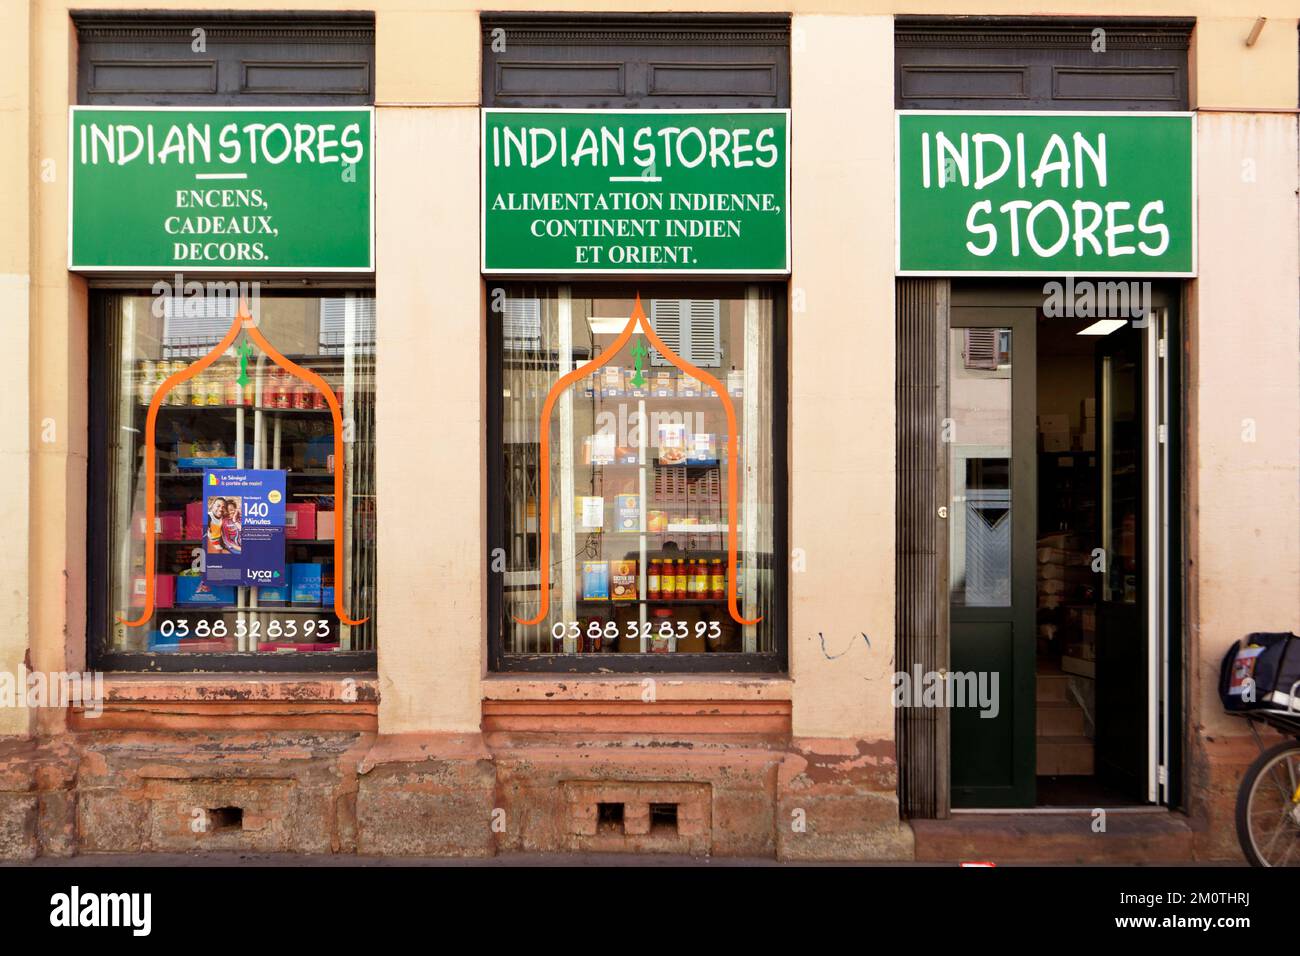 France, Bas Rhin, Strasbourg, Railway station district, rue de la Course street, Indian stores, Asian grocery store Stock Photo